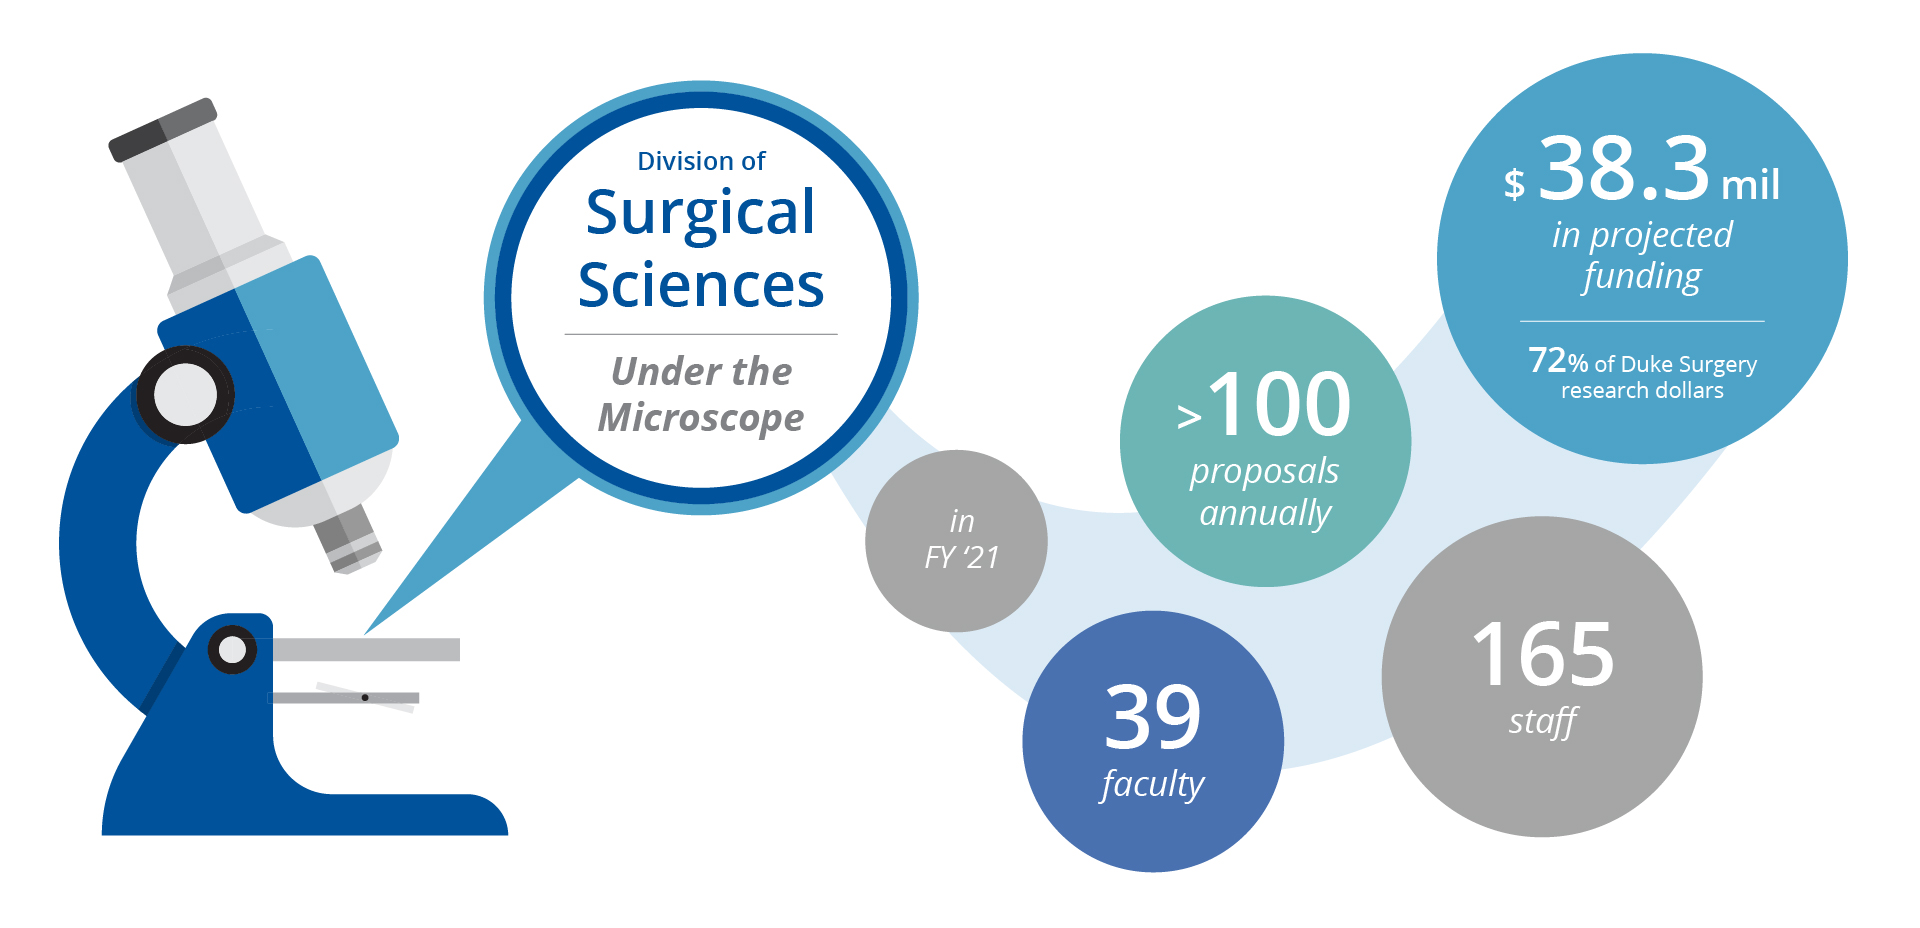 The Division of Surgical Sciences within the Section of Surgical Disciplines is robust, with faculty research in basic, pre-clinical, and clinical studies focusing on myriad interests.